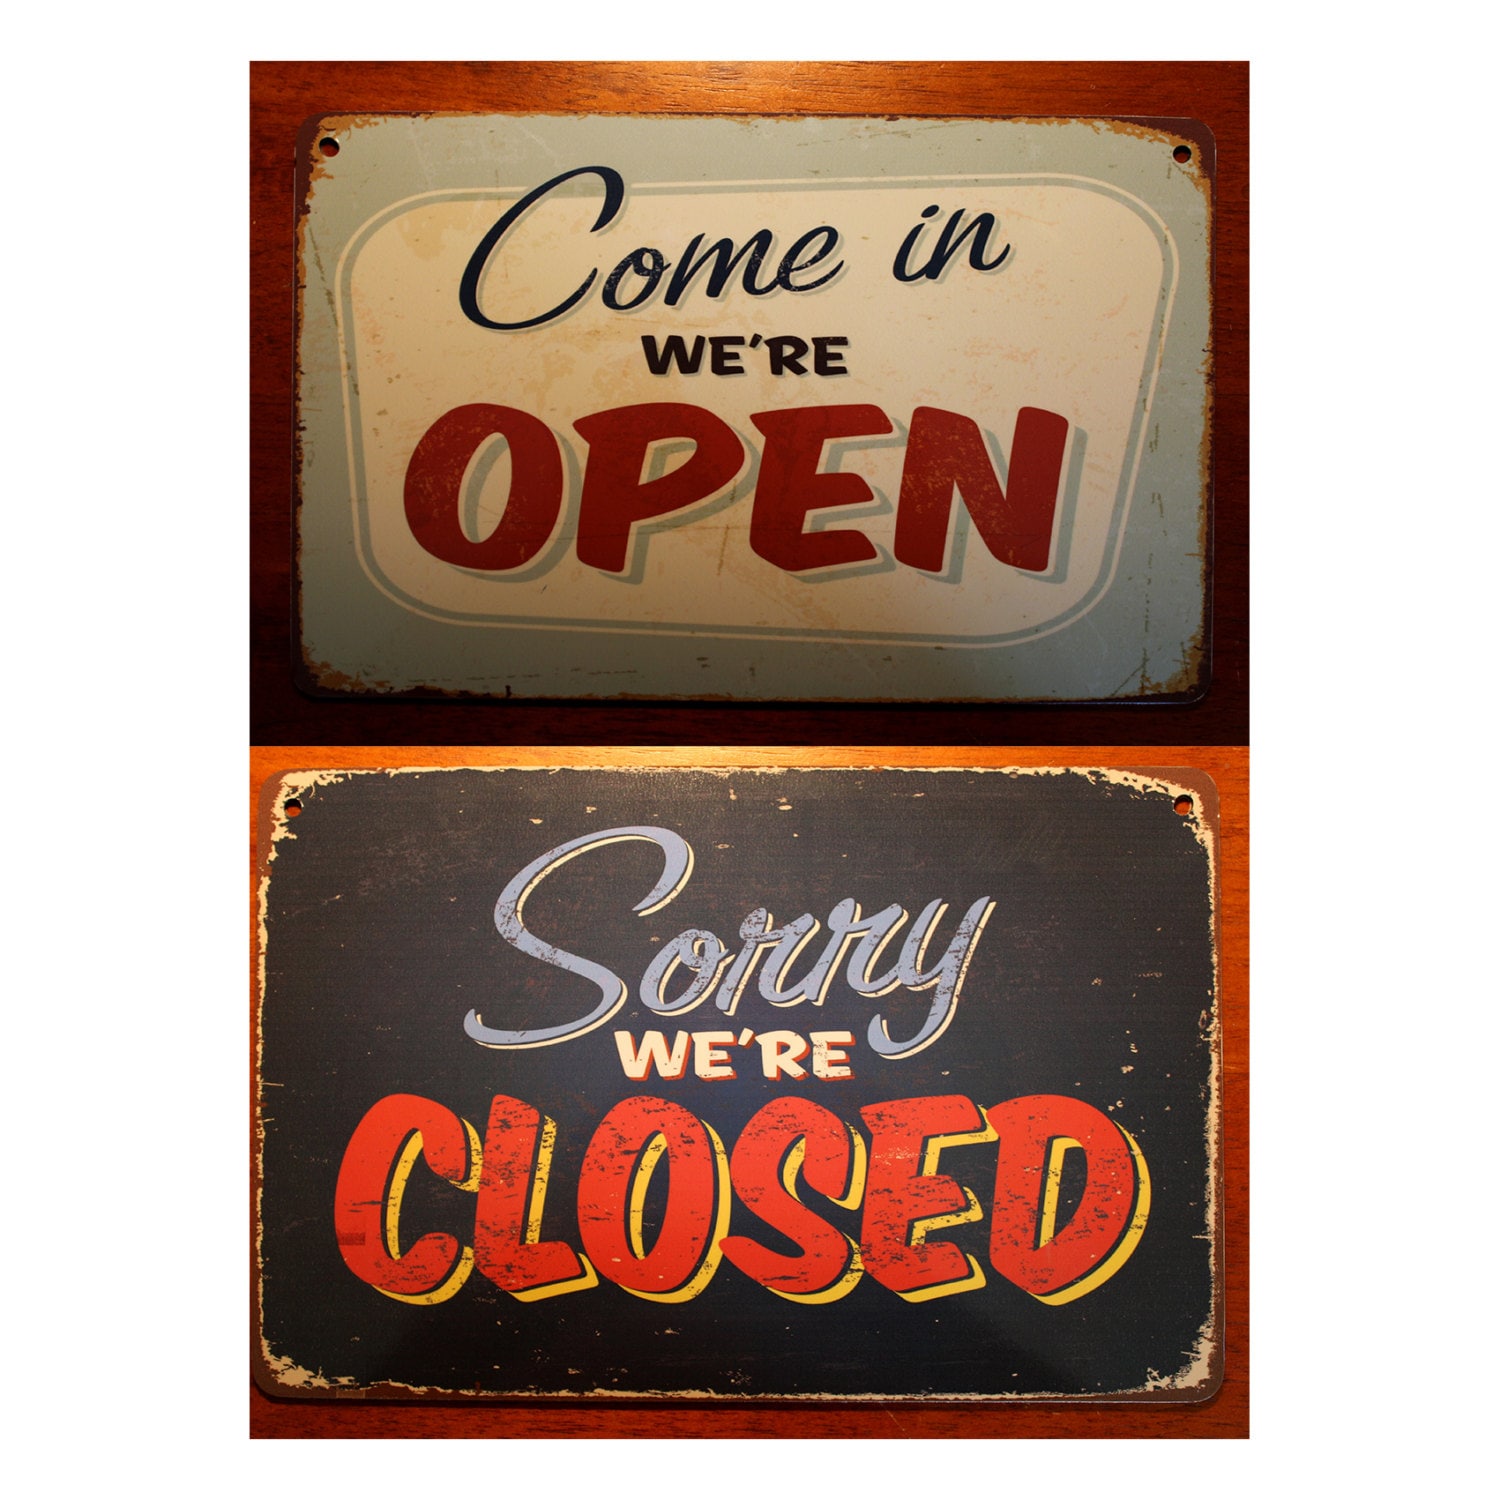 OPEN CLOSED SIGN Vintage Style Open Closed Sign Come In